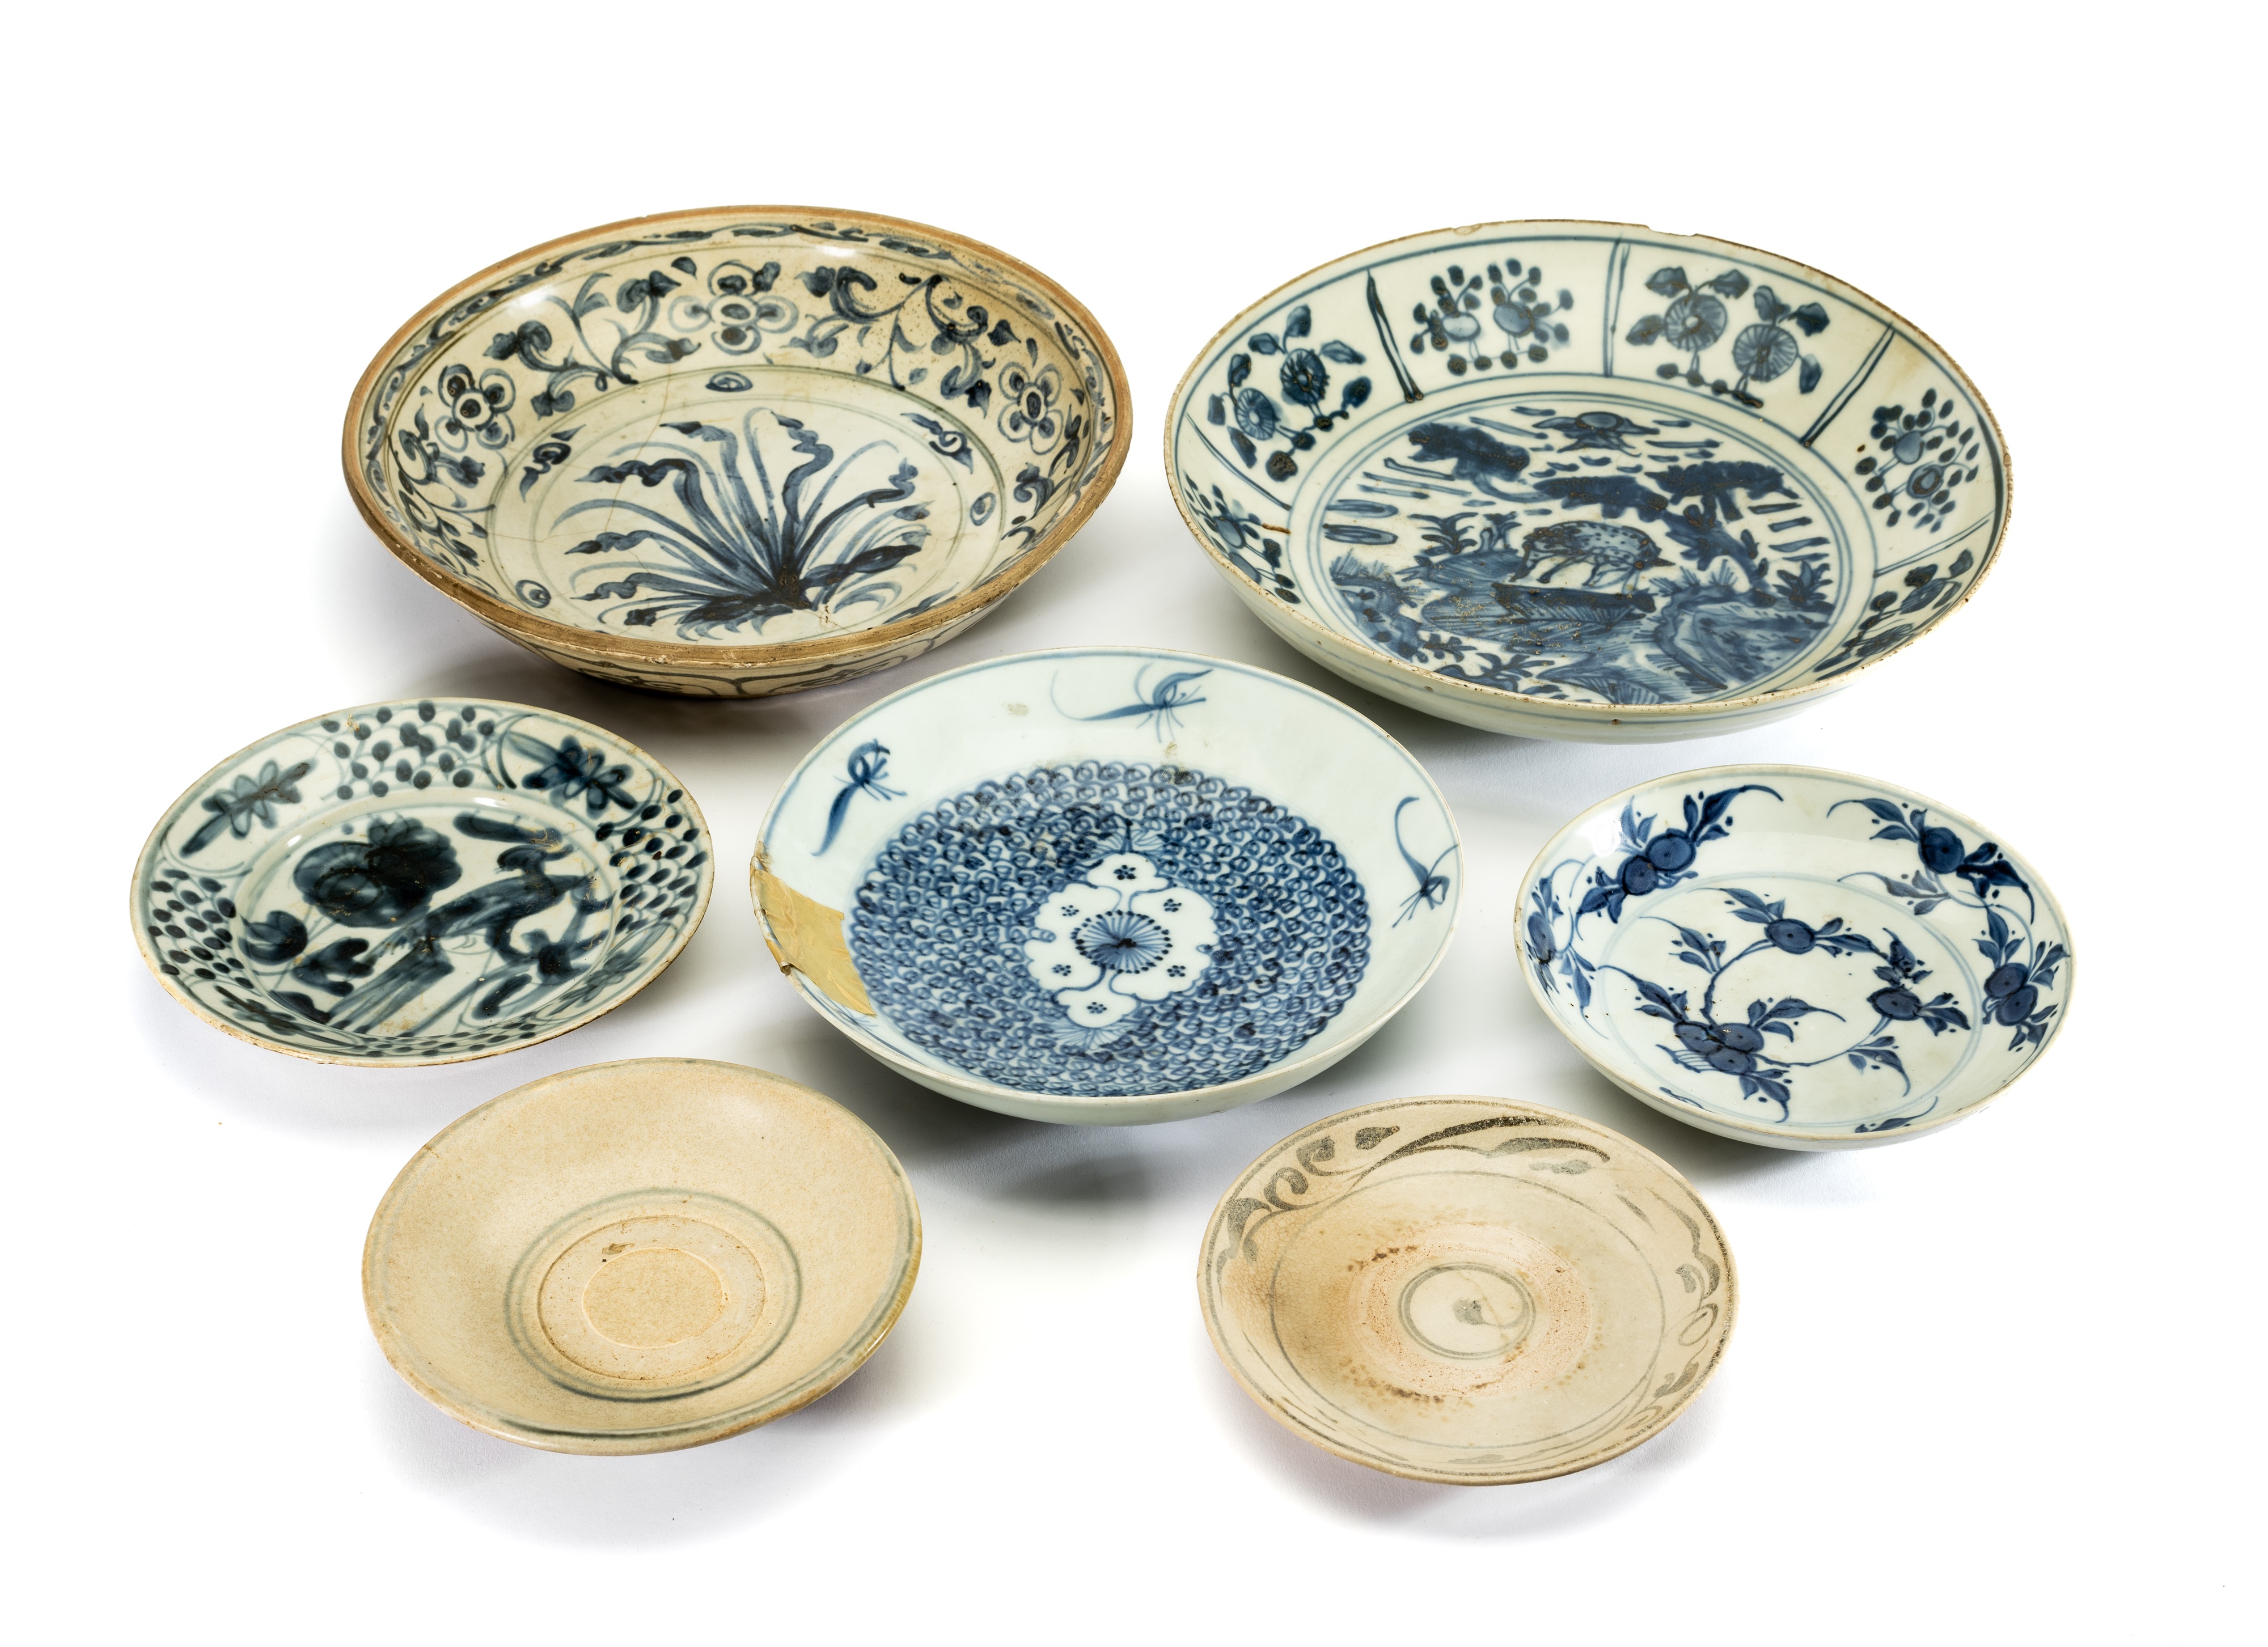 A LARGE CHINESE BLUE AND WHITE DISH, LATE MING DYNASTY